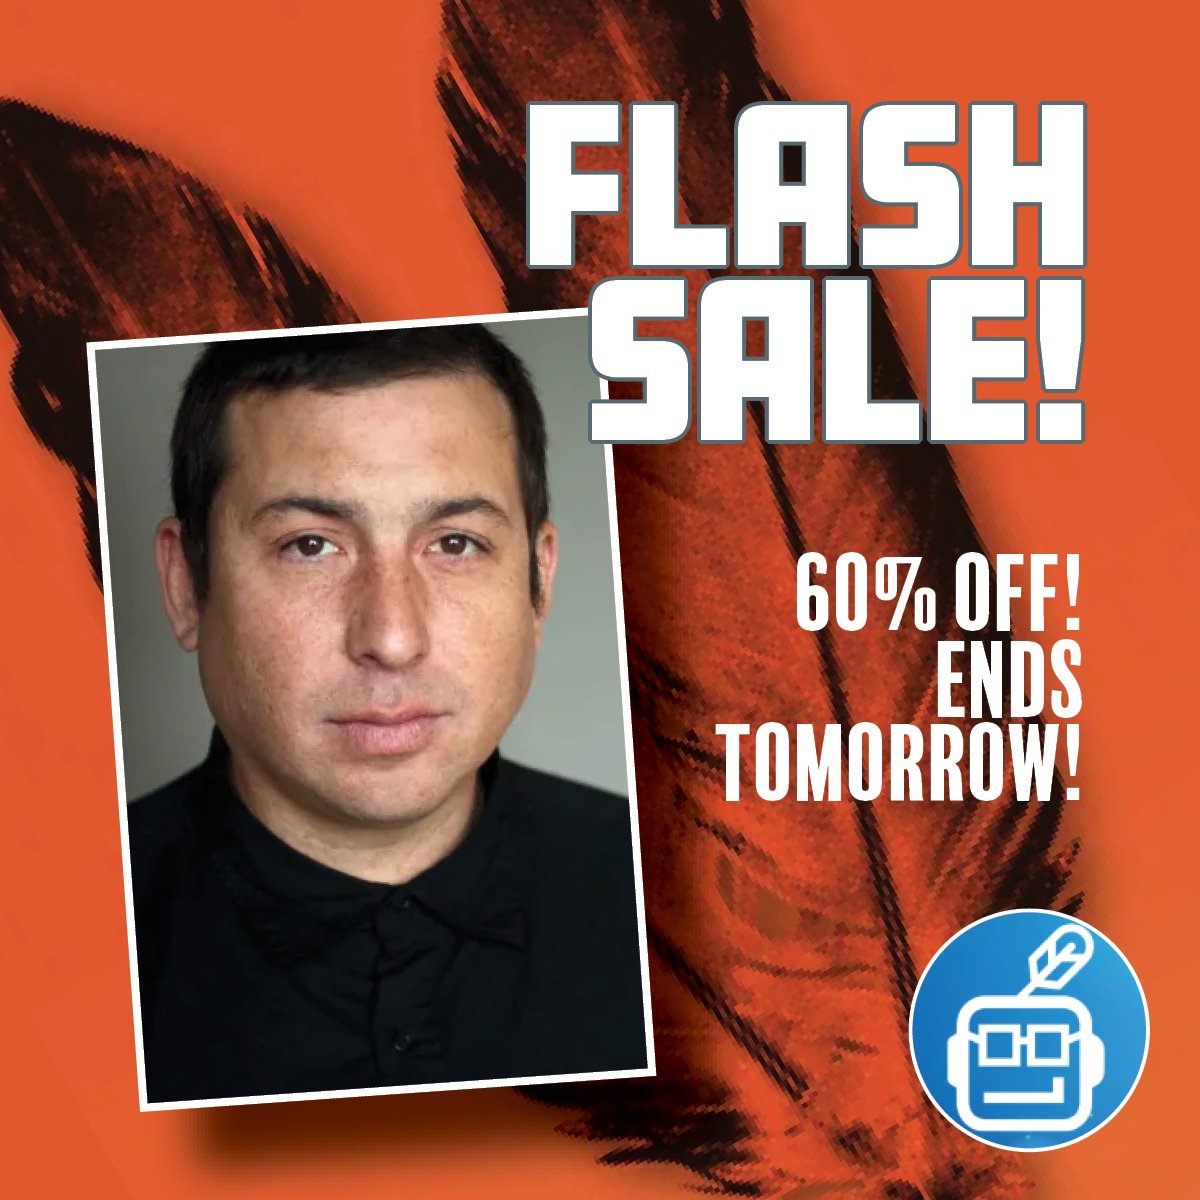 FLASH SALE for Tommy Orange's renowned best seller THERE, THERE - ENDS TOMORROW at midnight! 60% OFF!!! Read Tommy's 1st award-winning novel before the 2nd is out! ➡️ atcgbooksandcomics.com

#FlashSale #NativeCreatives #TommyOrange #ThereThere #NYTBestSeller #IndigenousStories